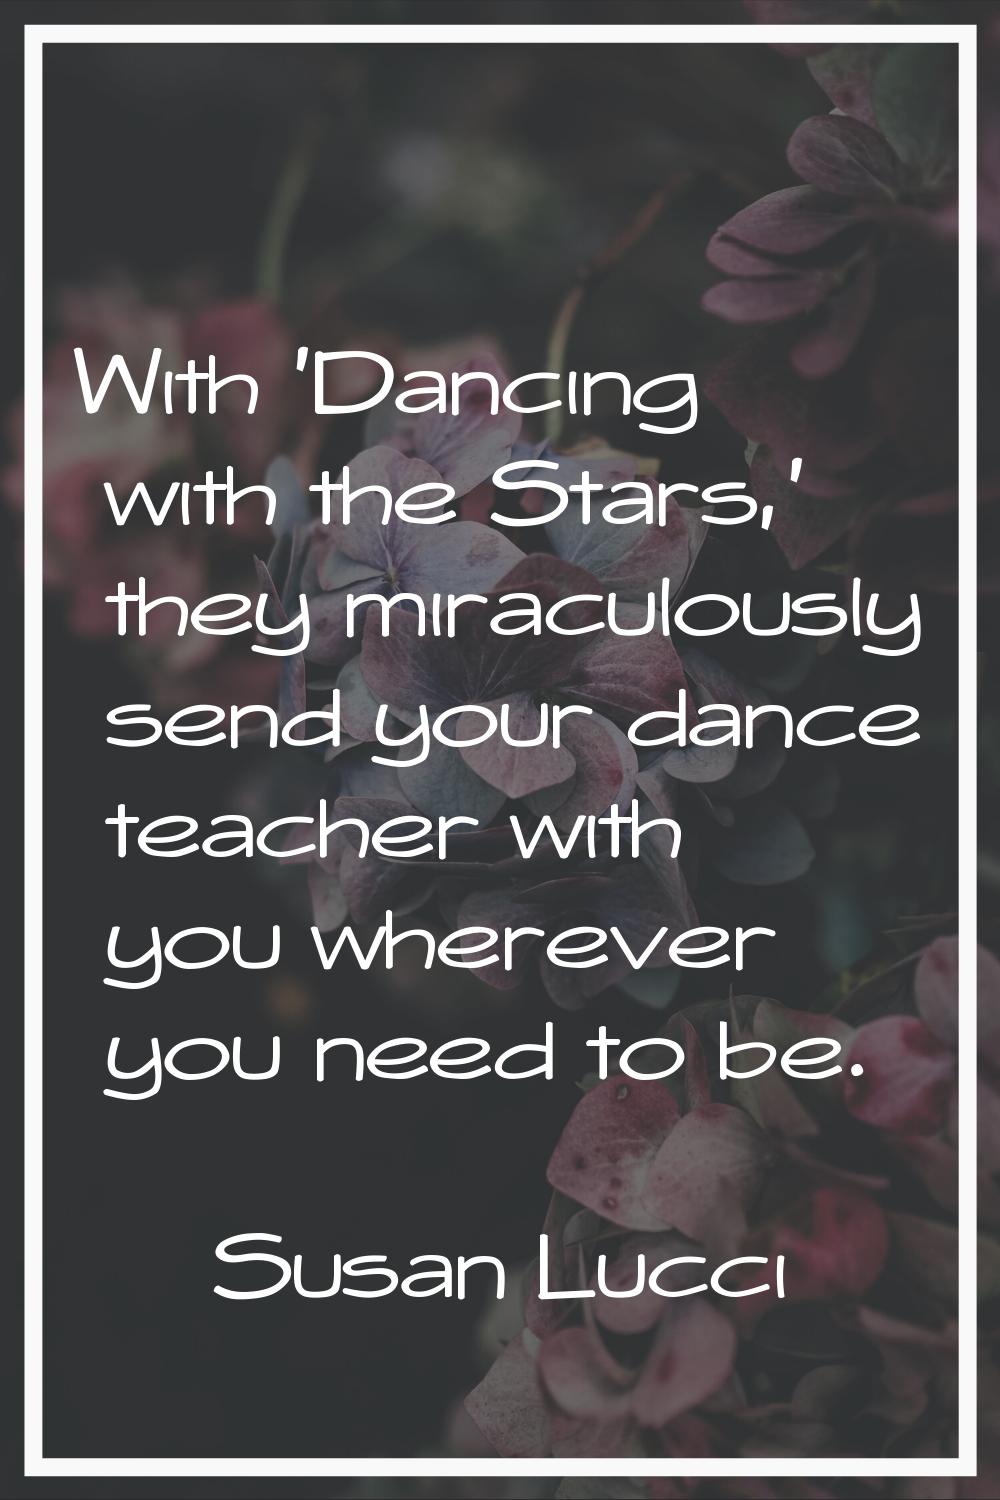 With 'Dancing with the Stars,' they miraculously send your dance teacher with you wherever you need